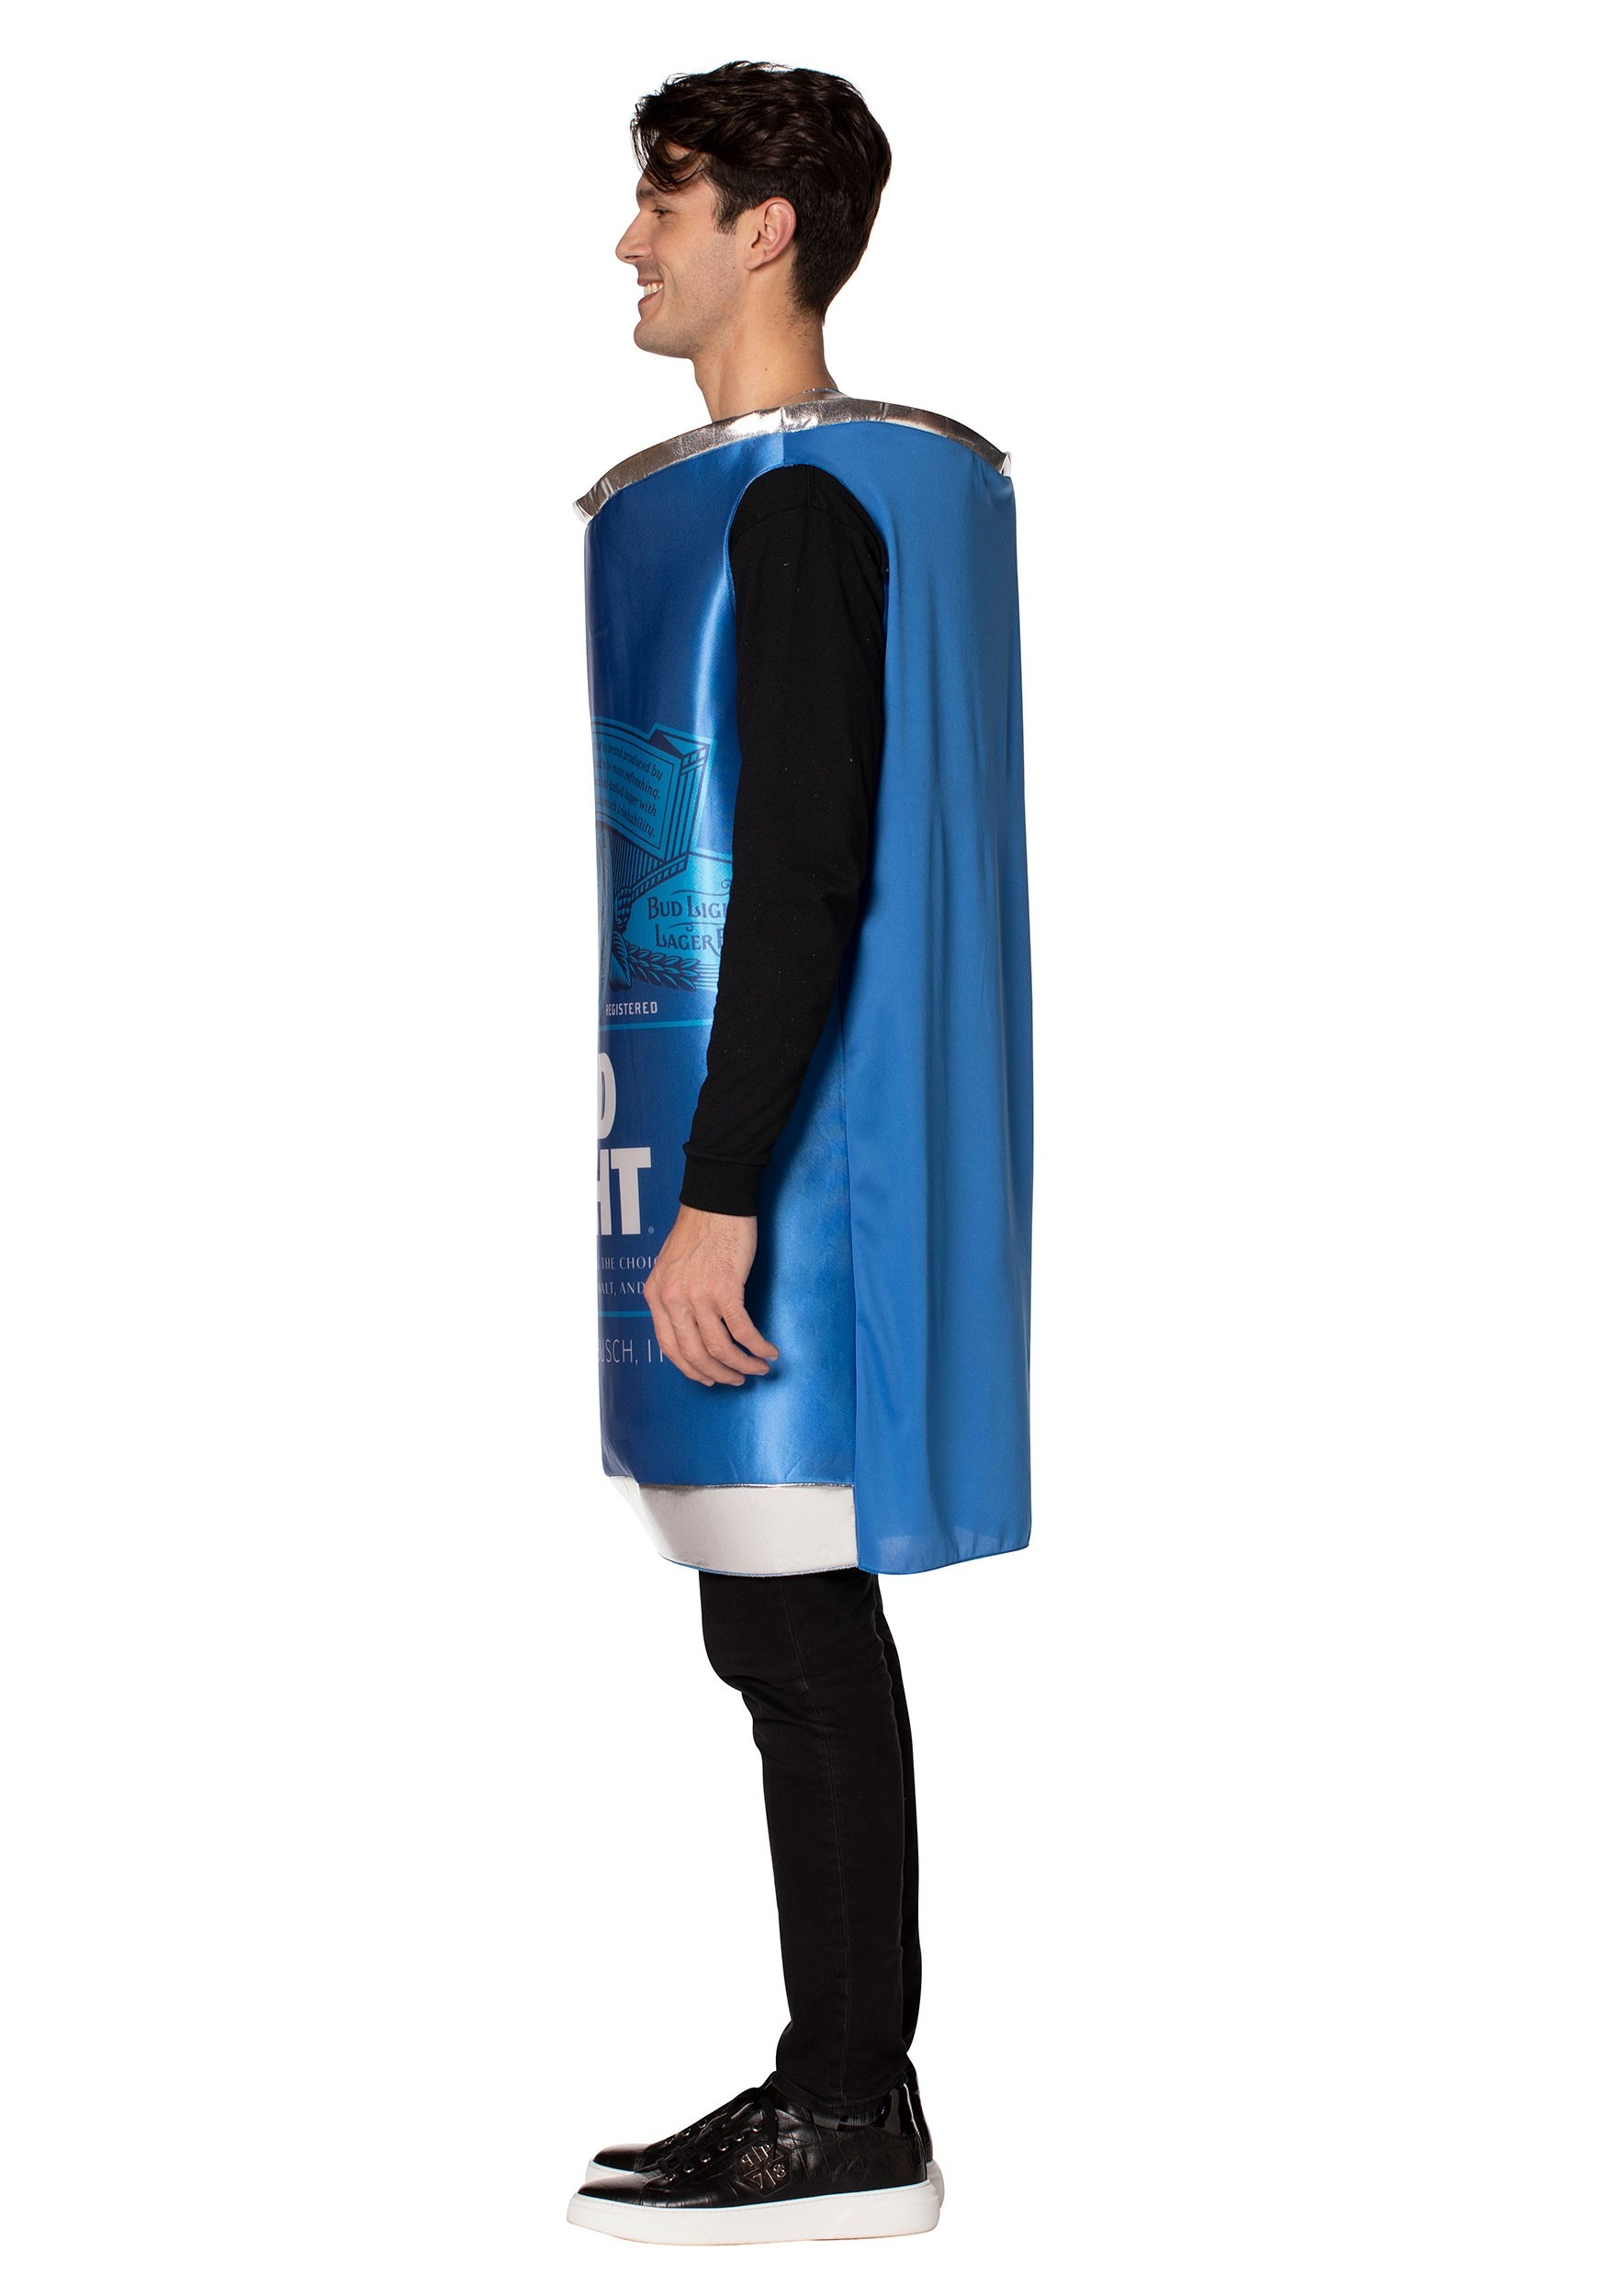 Bud Light Can Costume For Adults